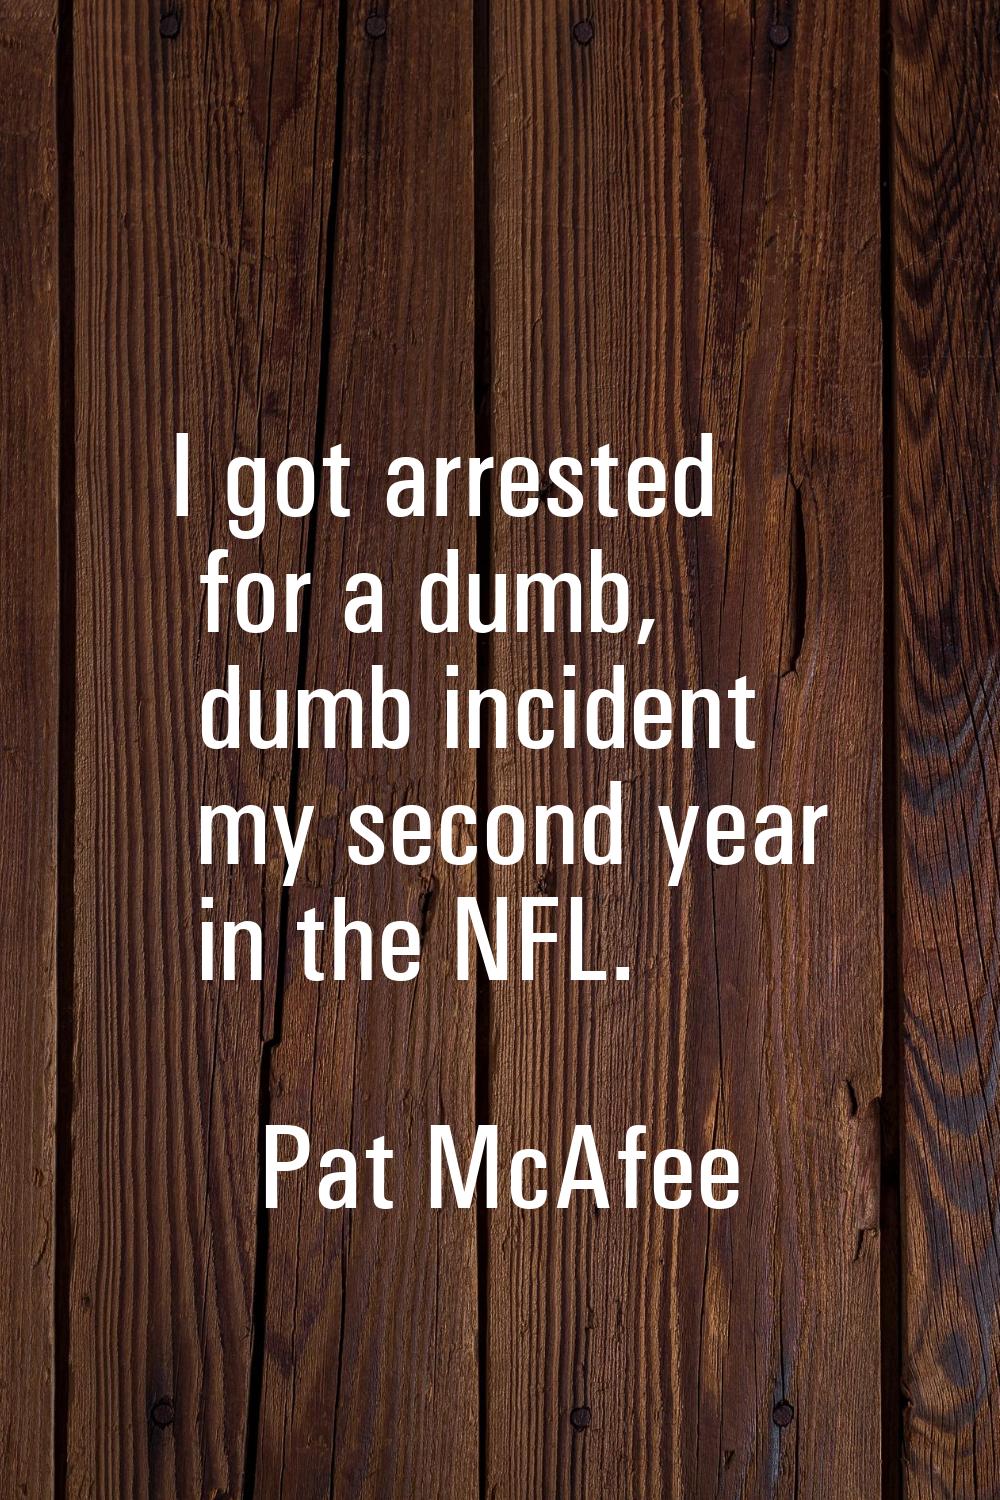 I got arrested for a dumb, dumb incident my second year in the NFL.